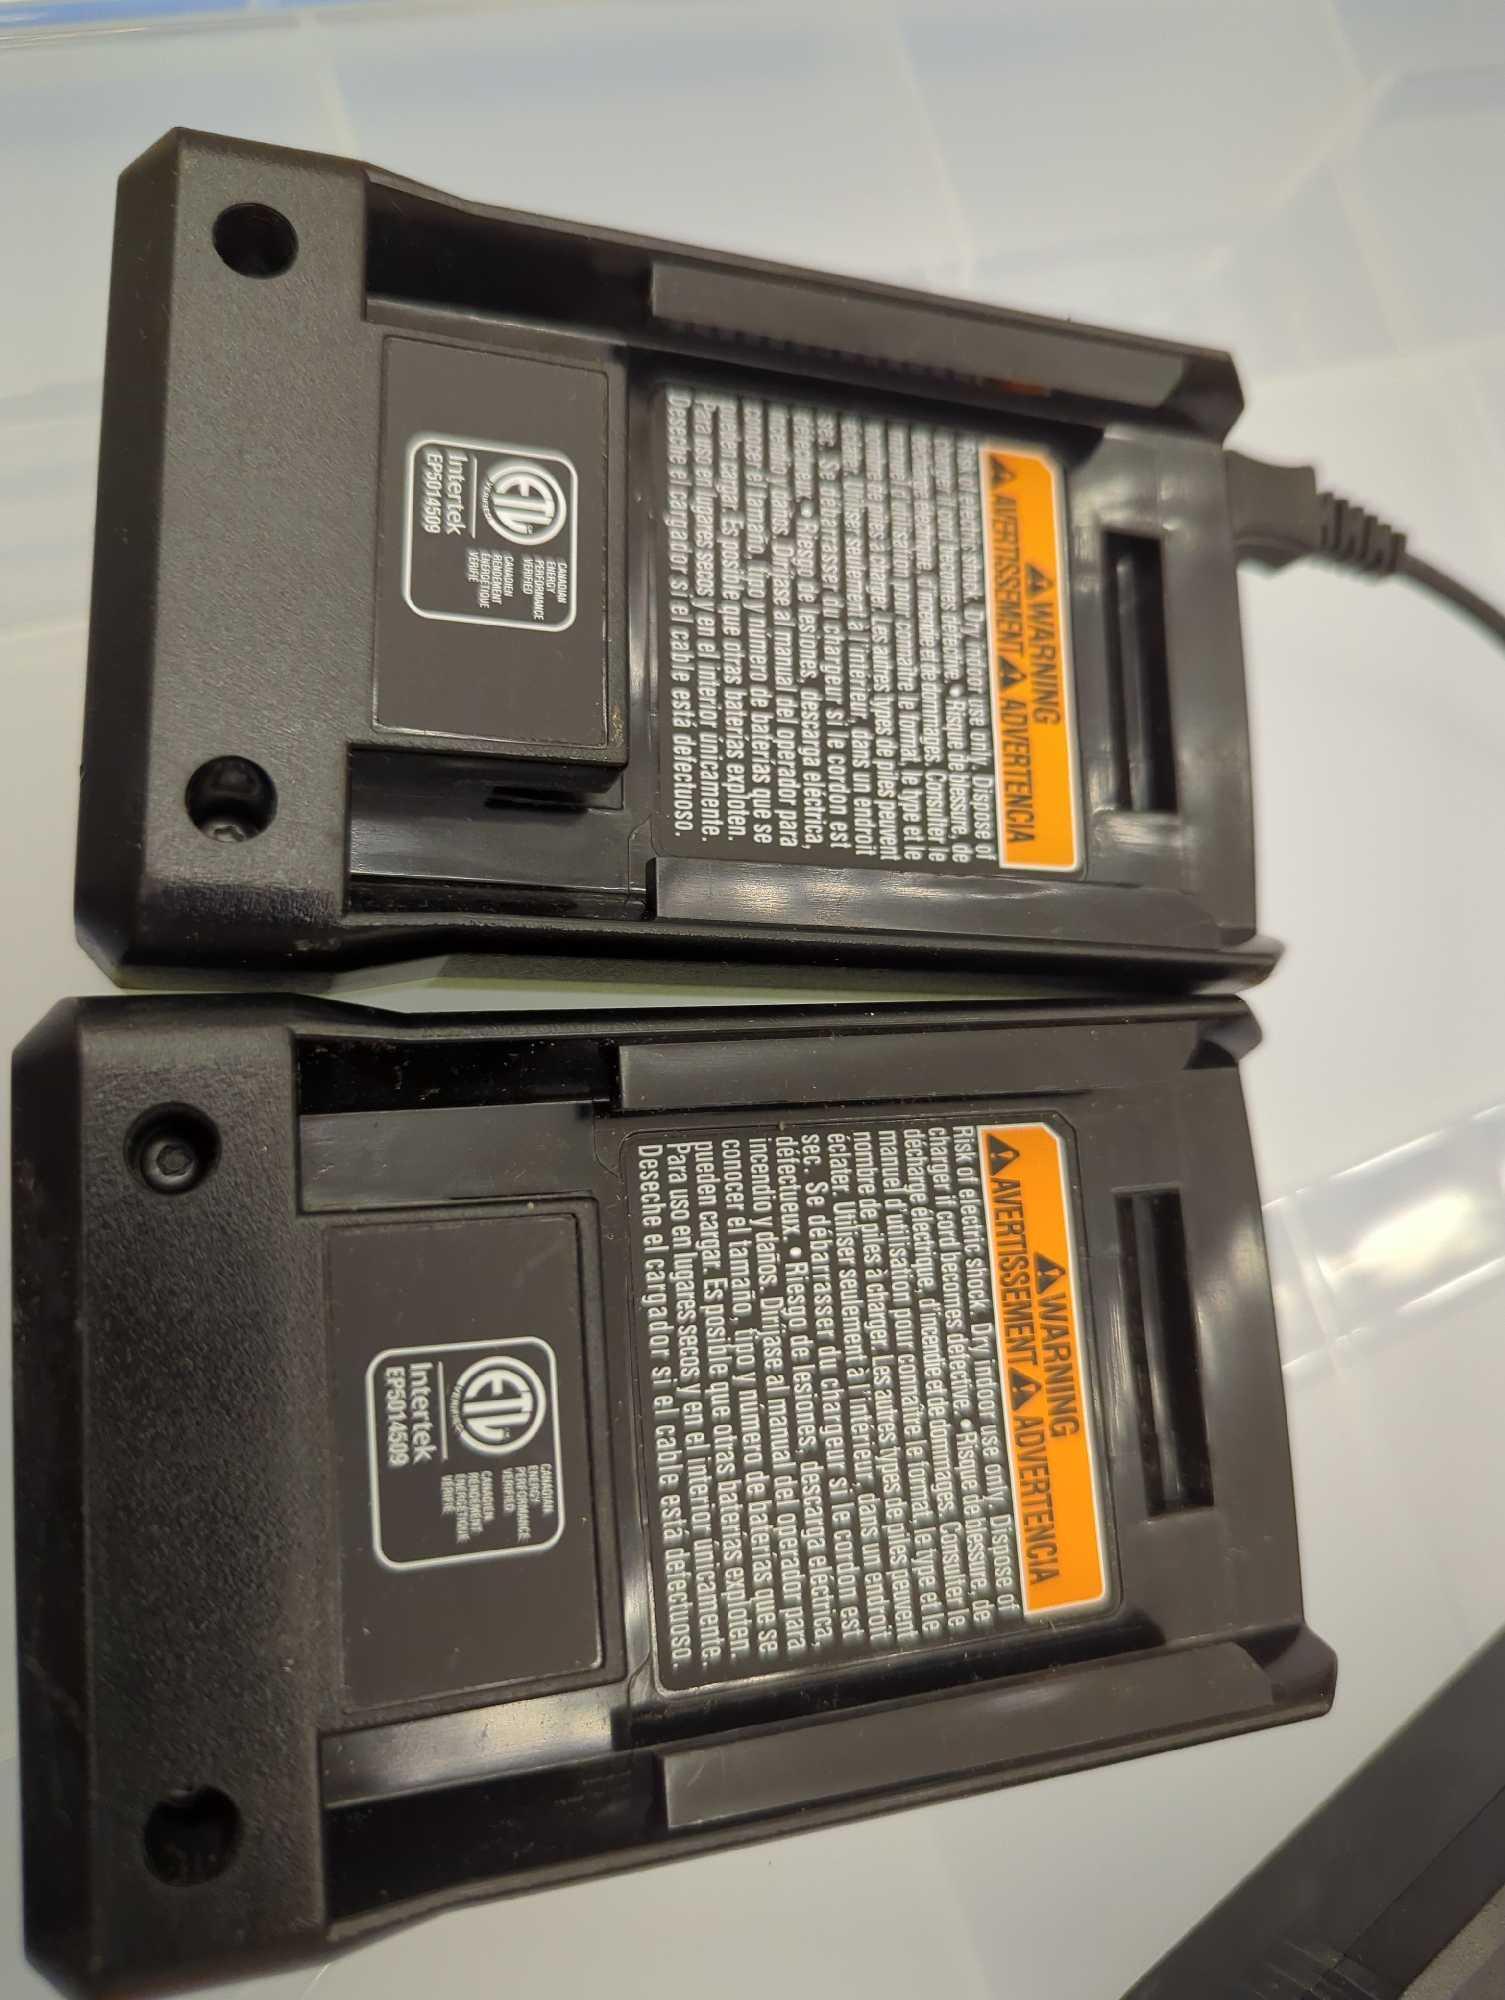 Lot of 2 RYOBI 40V Lithium-Ion Chargers with (1) USB Port, Retail Price $69/Each, Appears to be